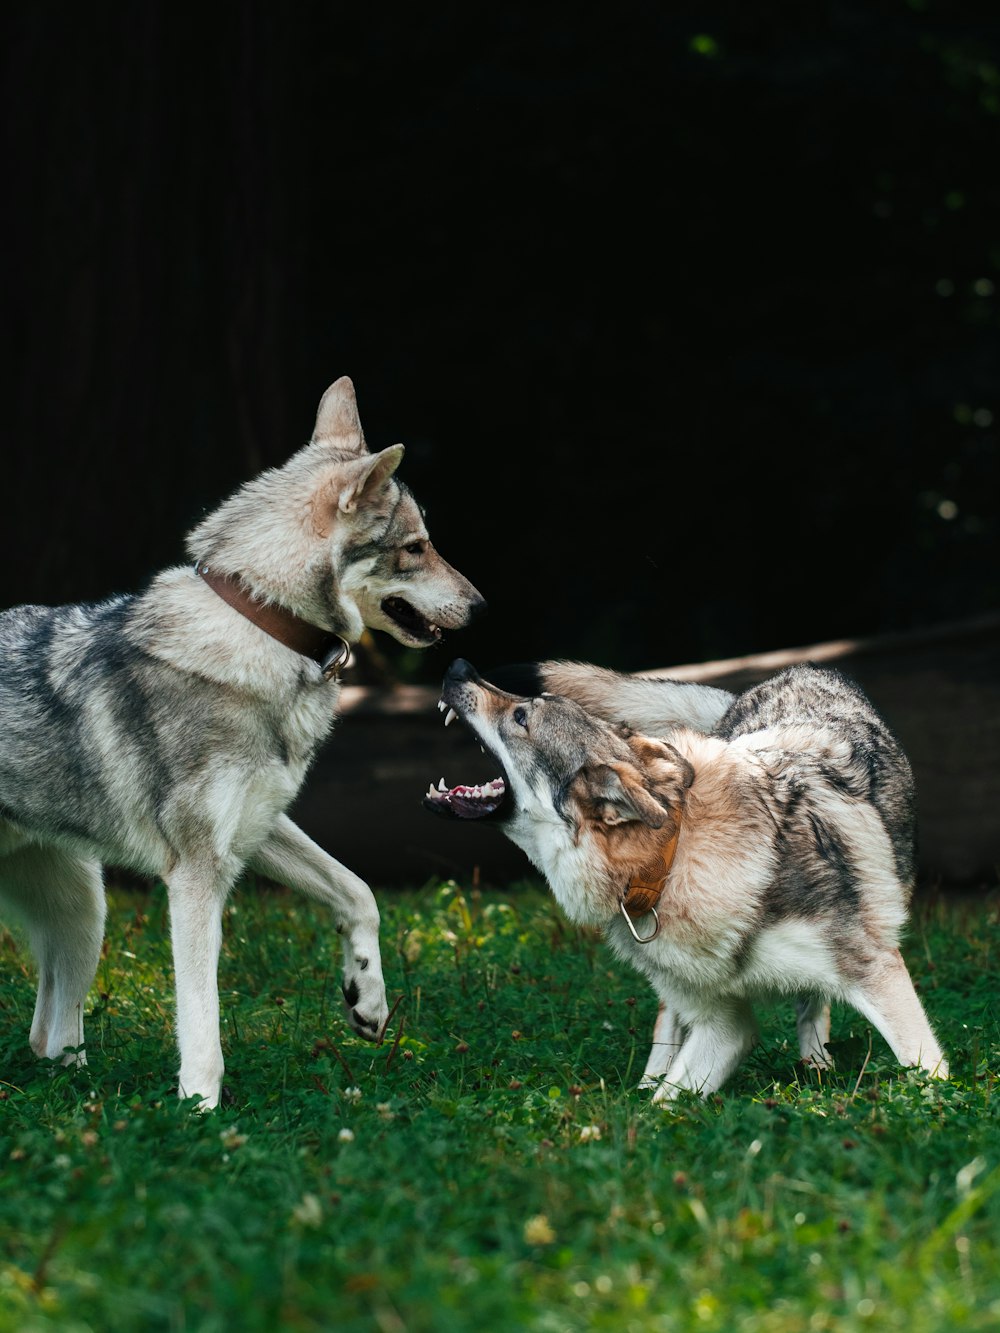 a dog biting another dog's nose